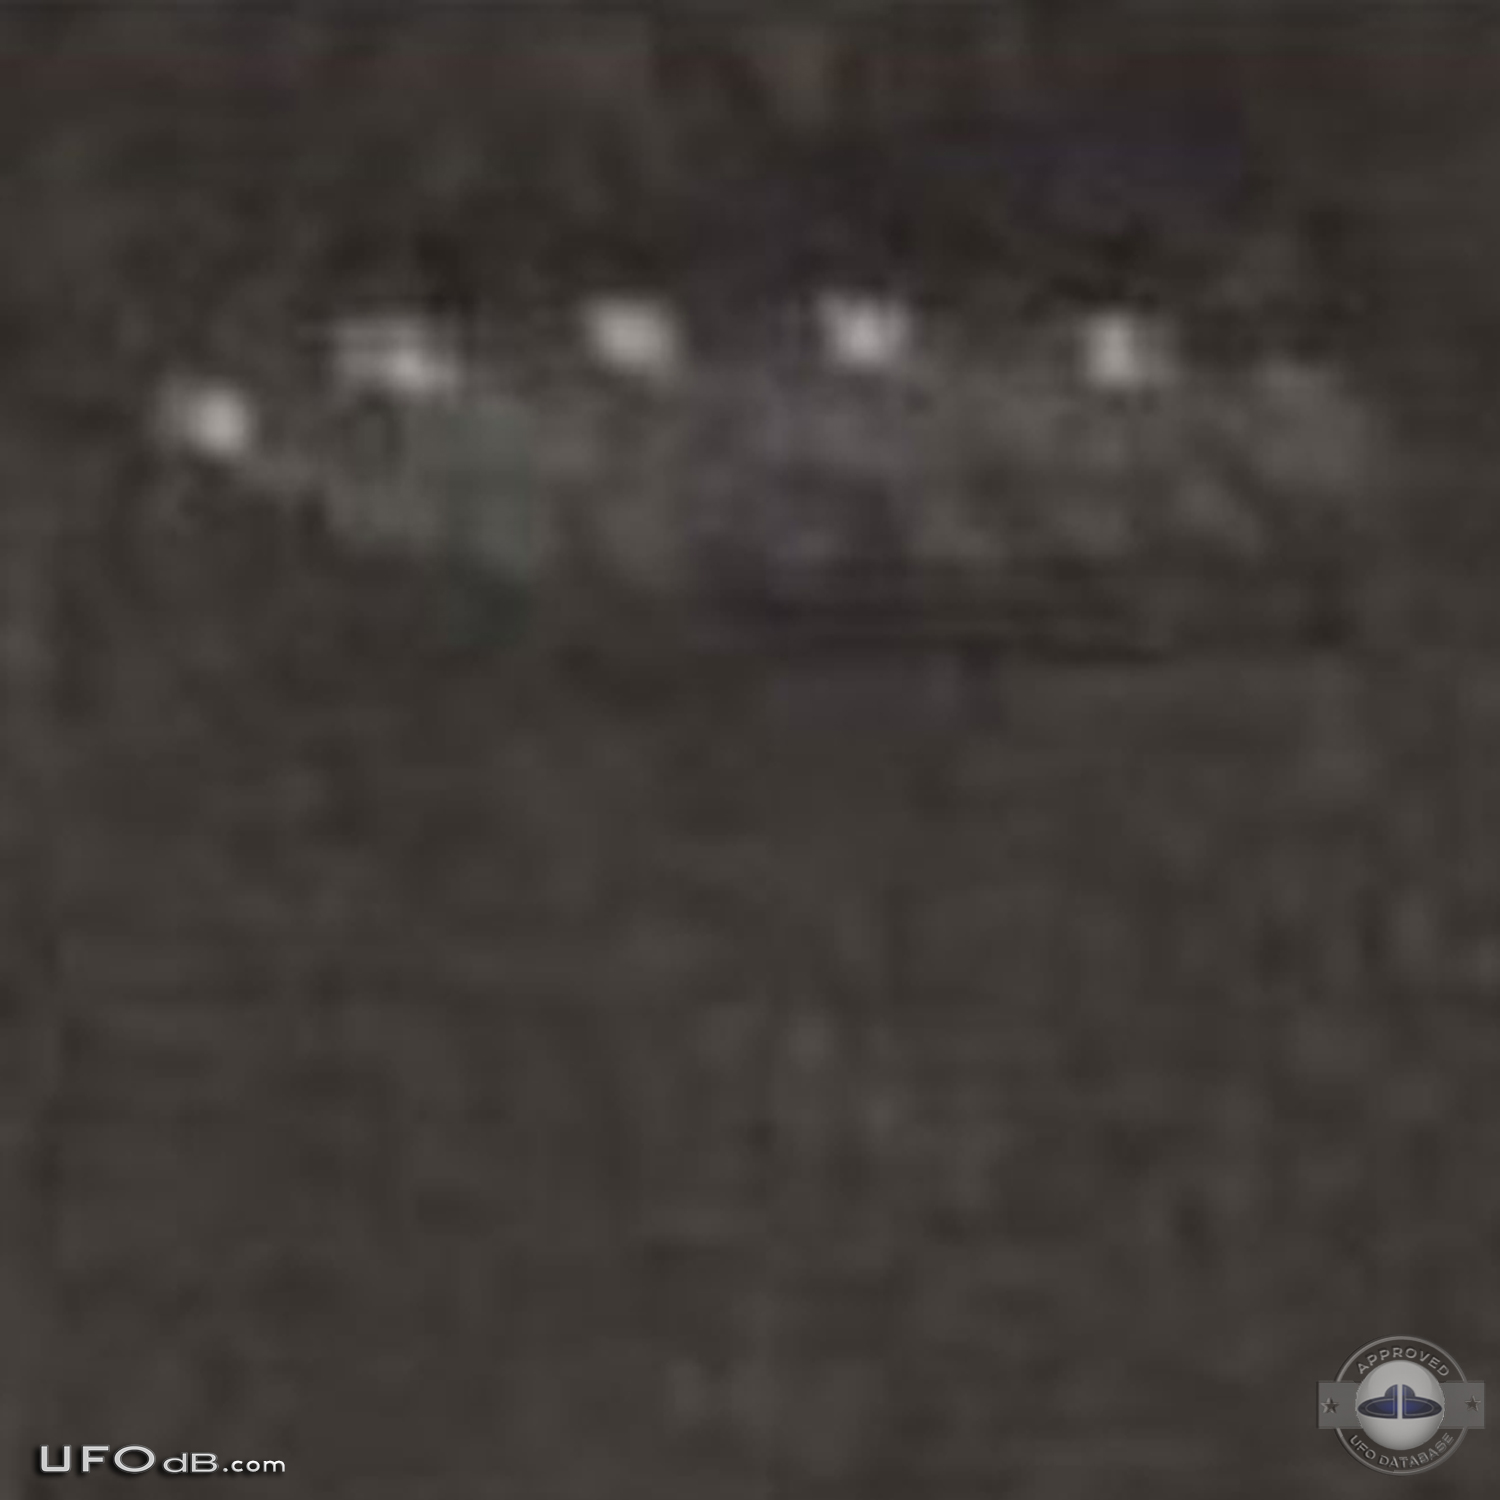 2003 UFO sighting from Dubai caught on picture by a programmer UFO Picture #462-4